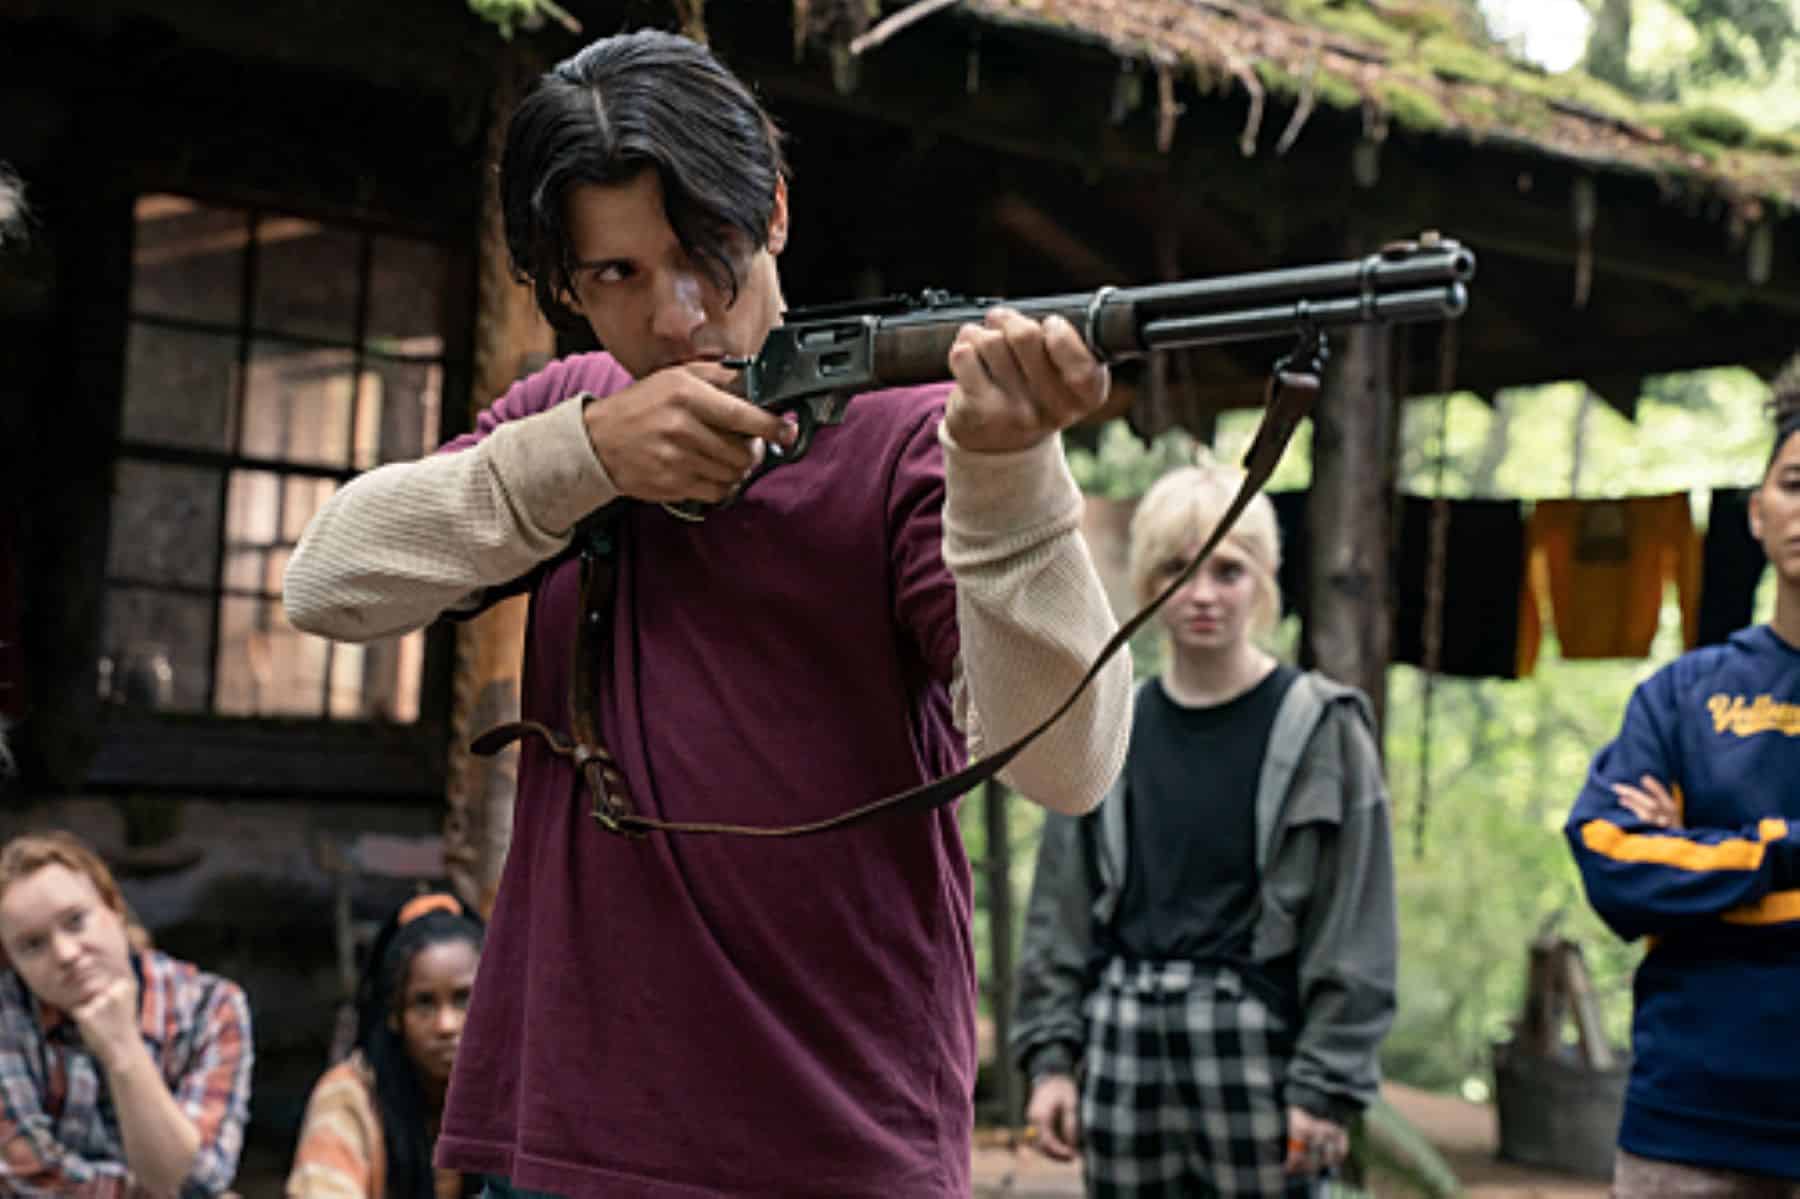 A man shoots a rifle at something offscreen in this photo by Showtime.